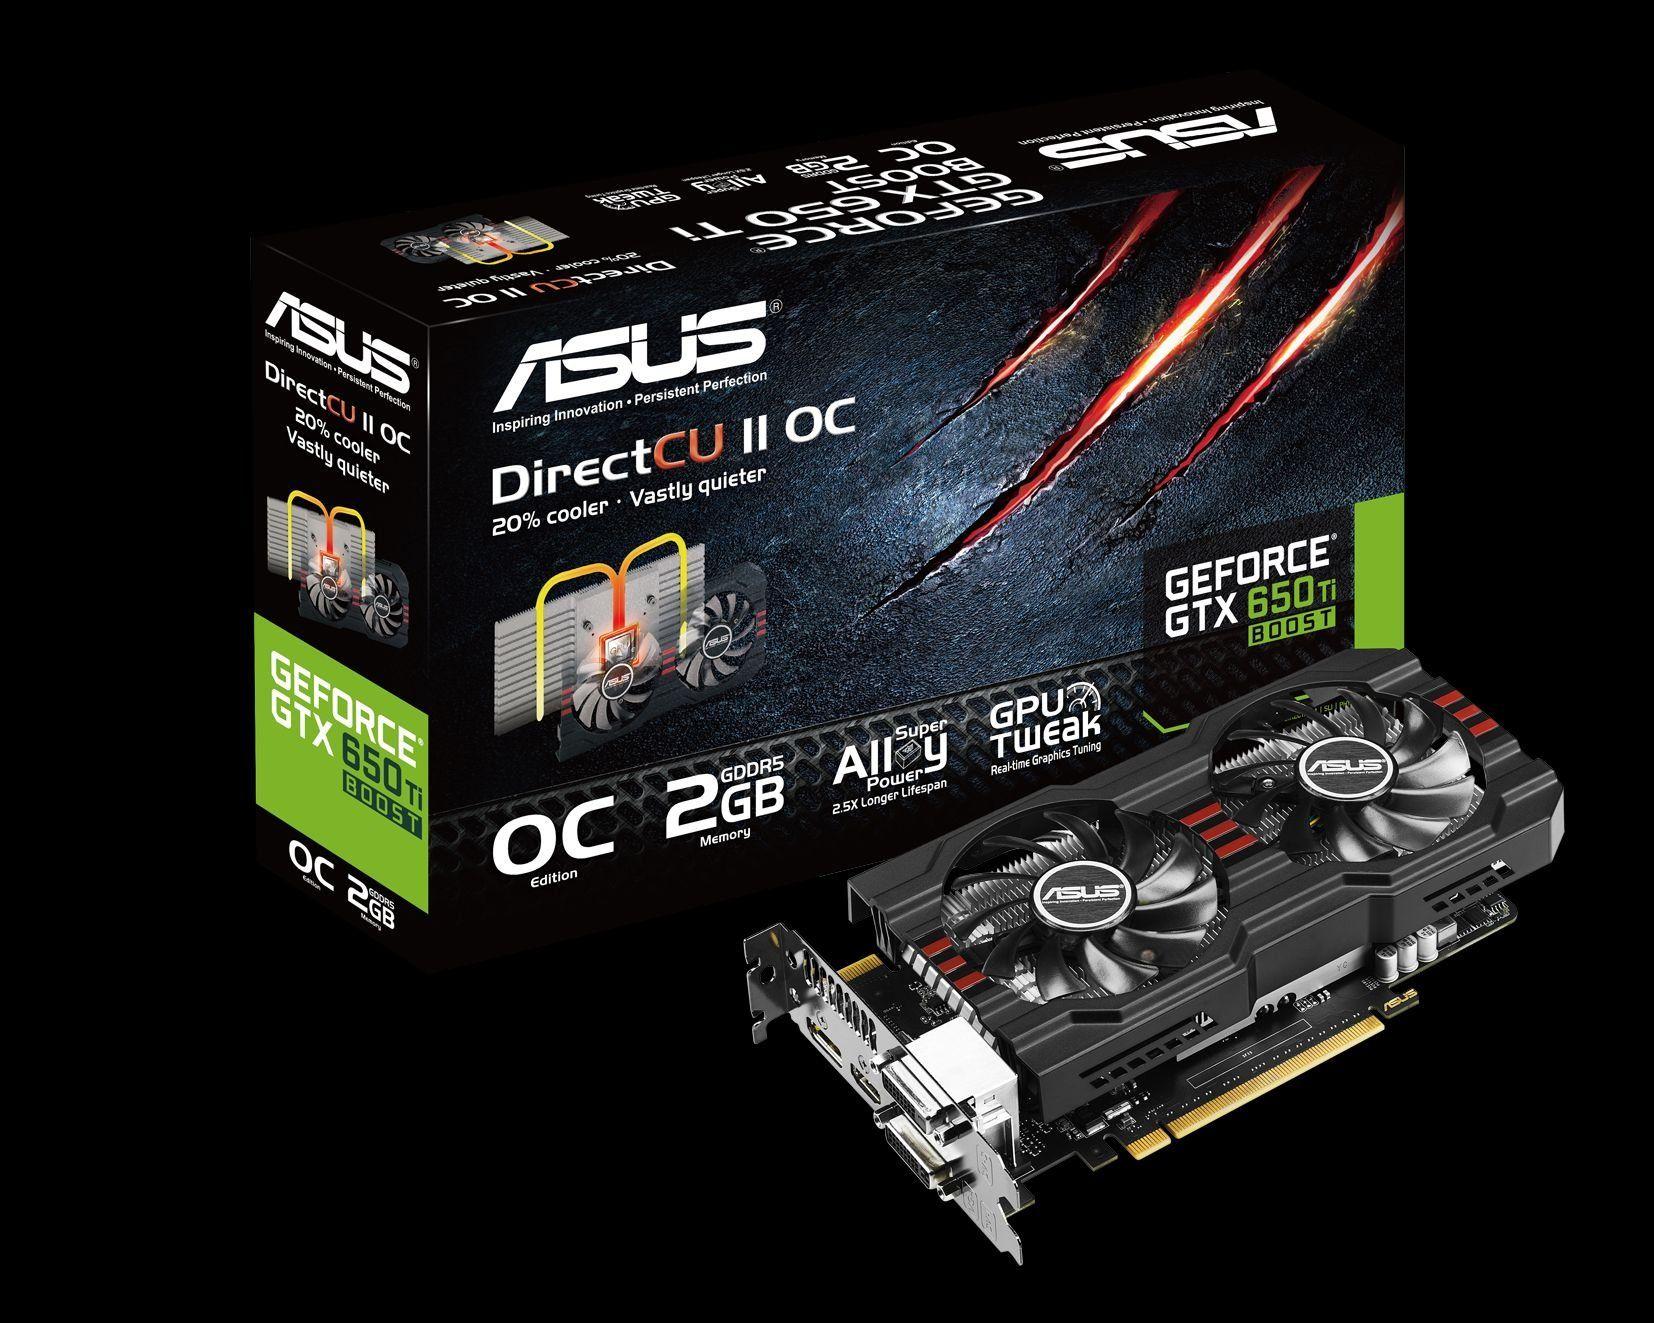 ASUS GTX GRAPHICS REPUBLIC GAMERS computer game video card